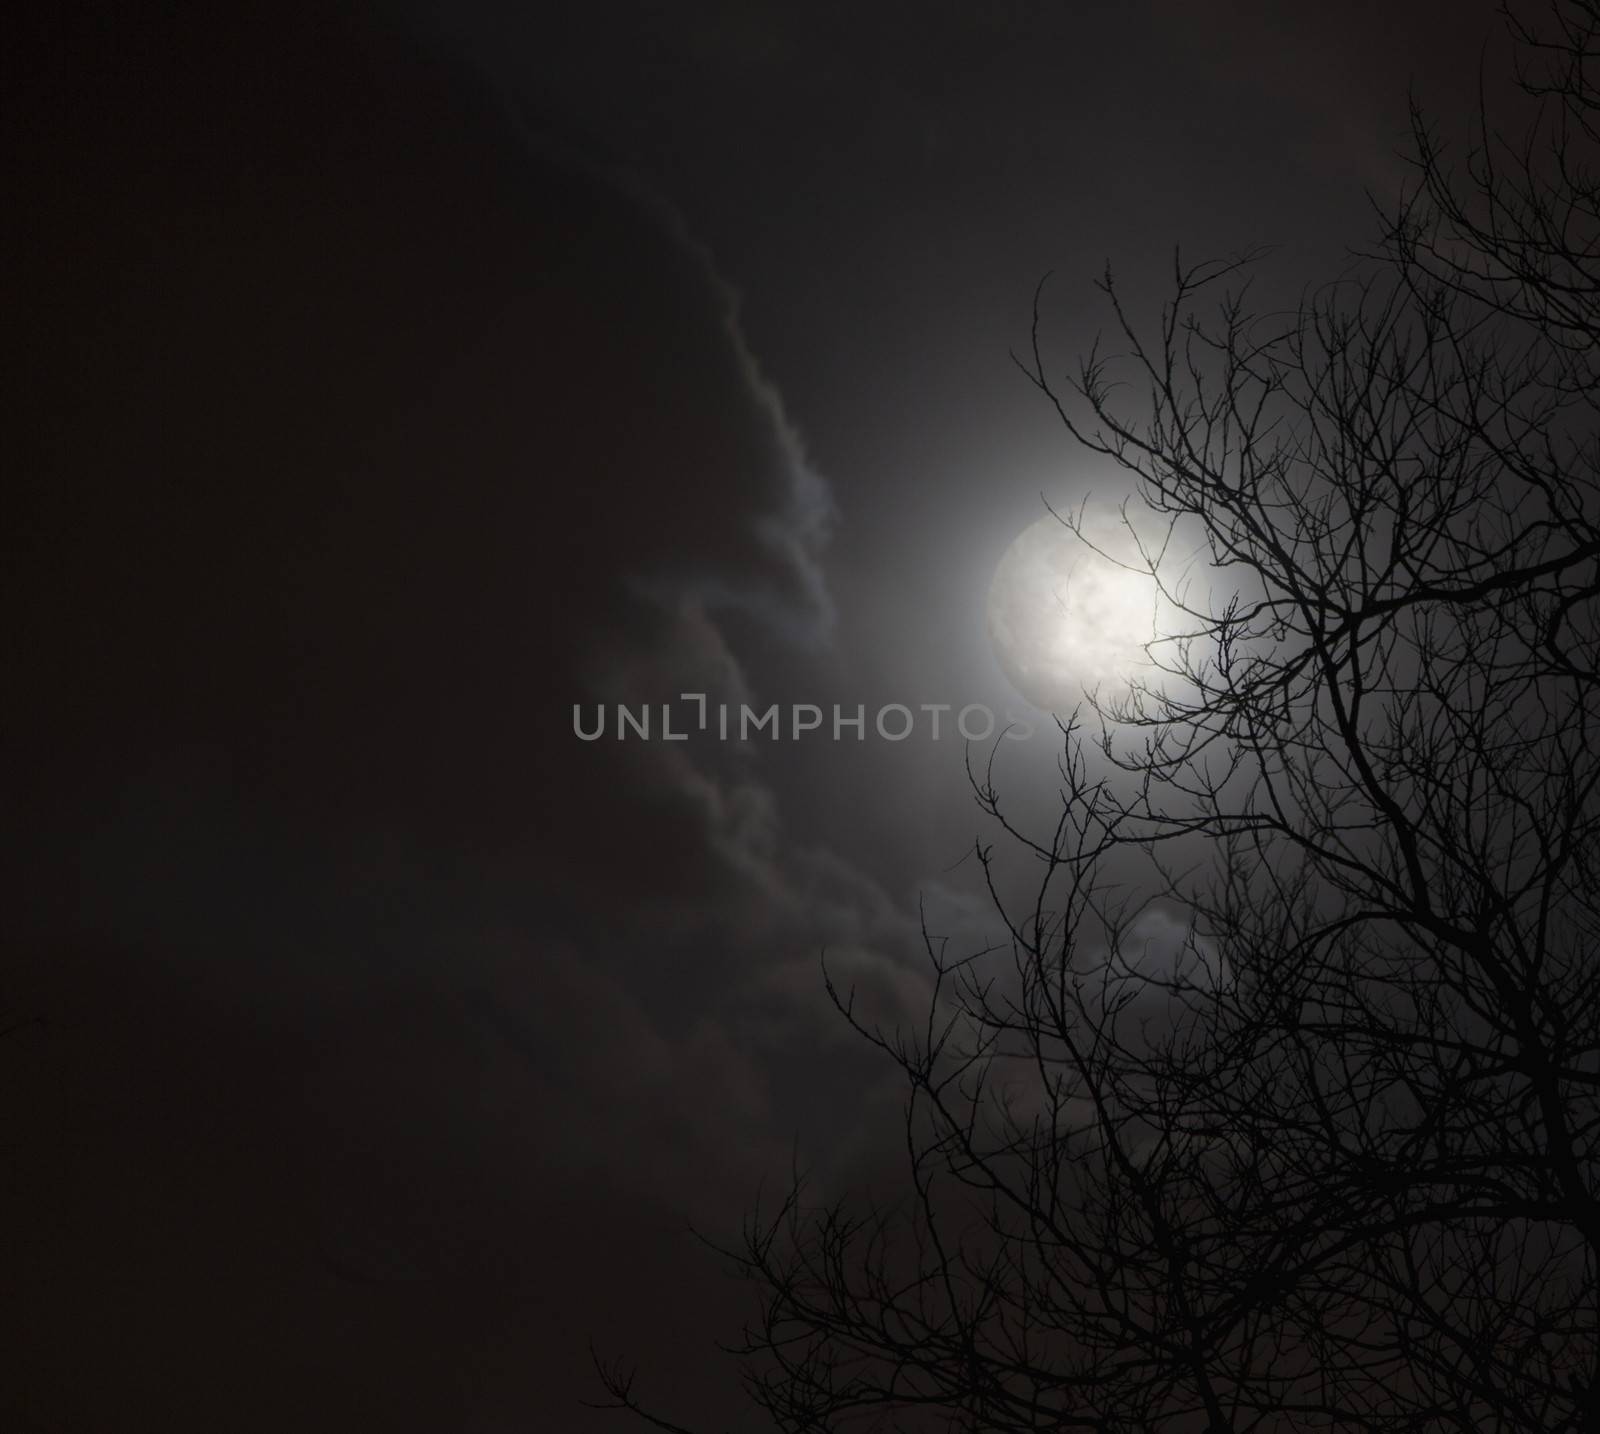 Full moon in night sky with clouds and silhouette of trees. by XiXinXing